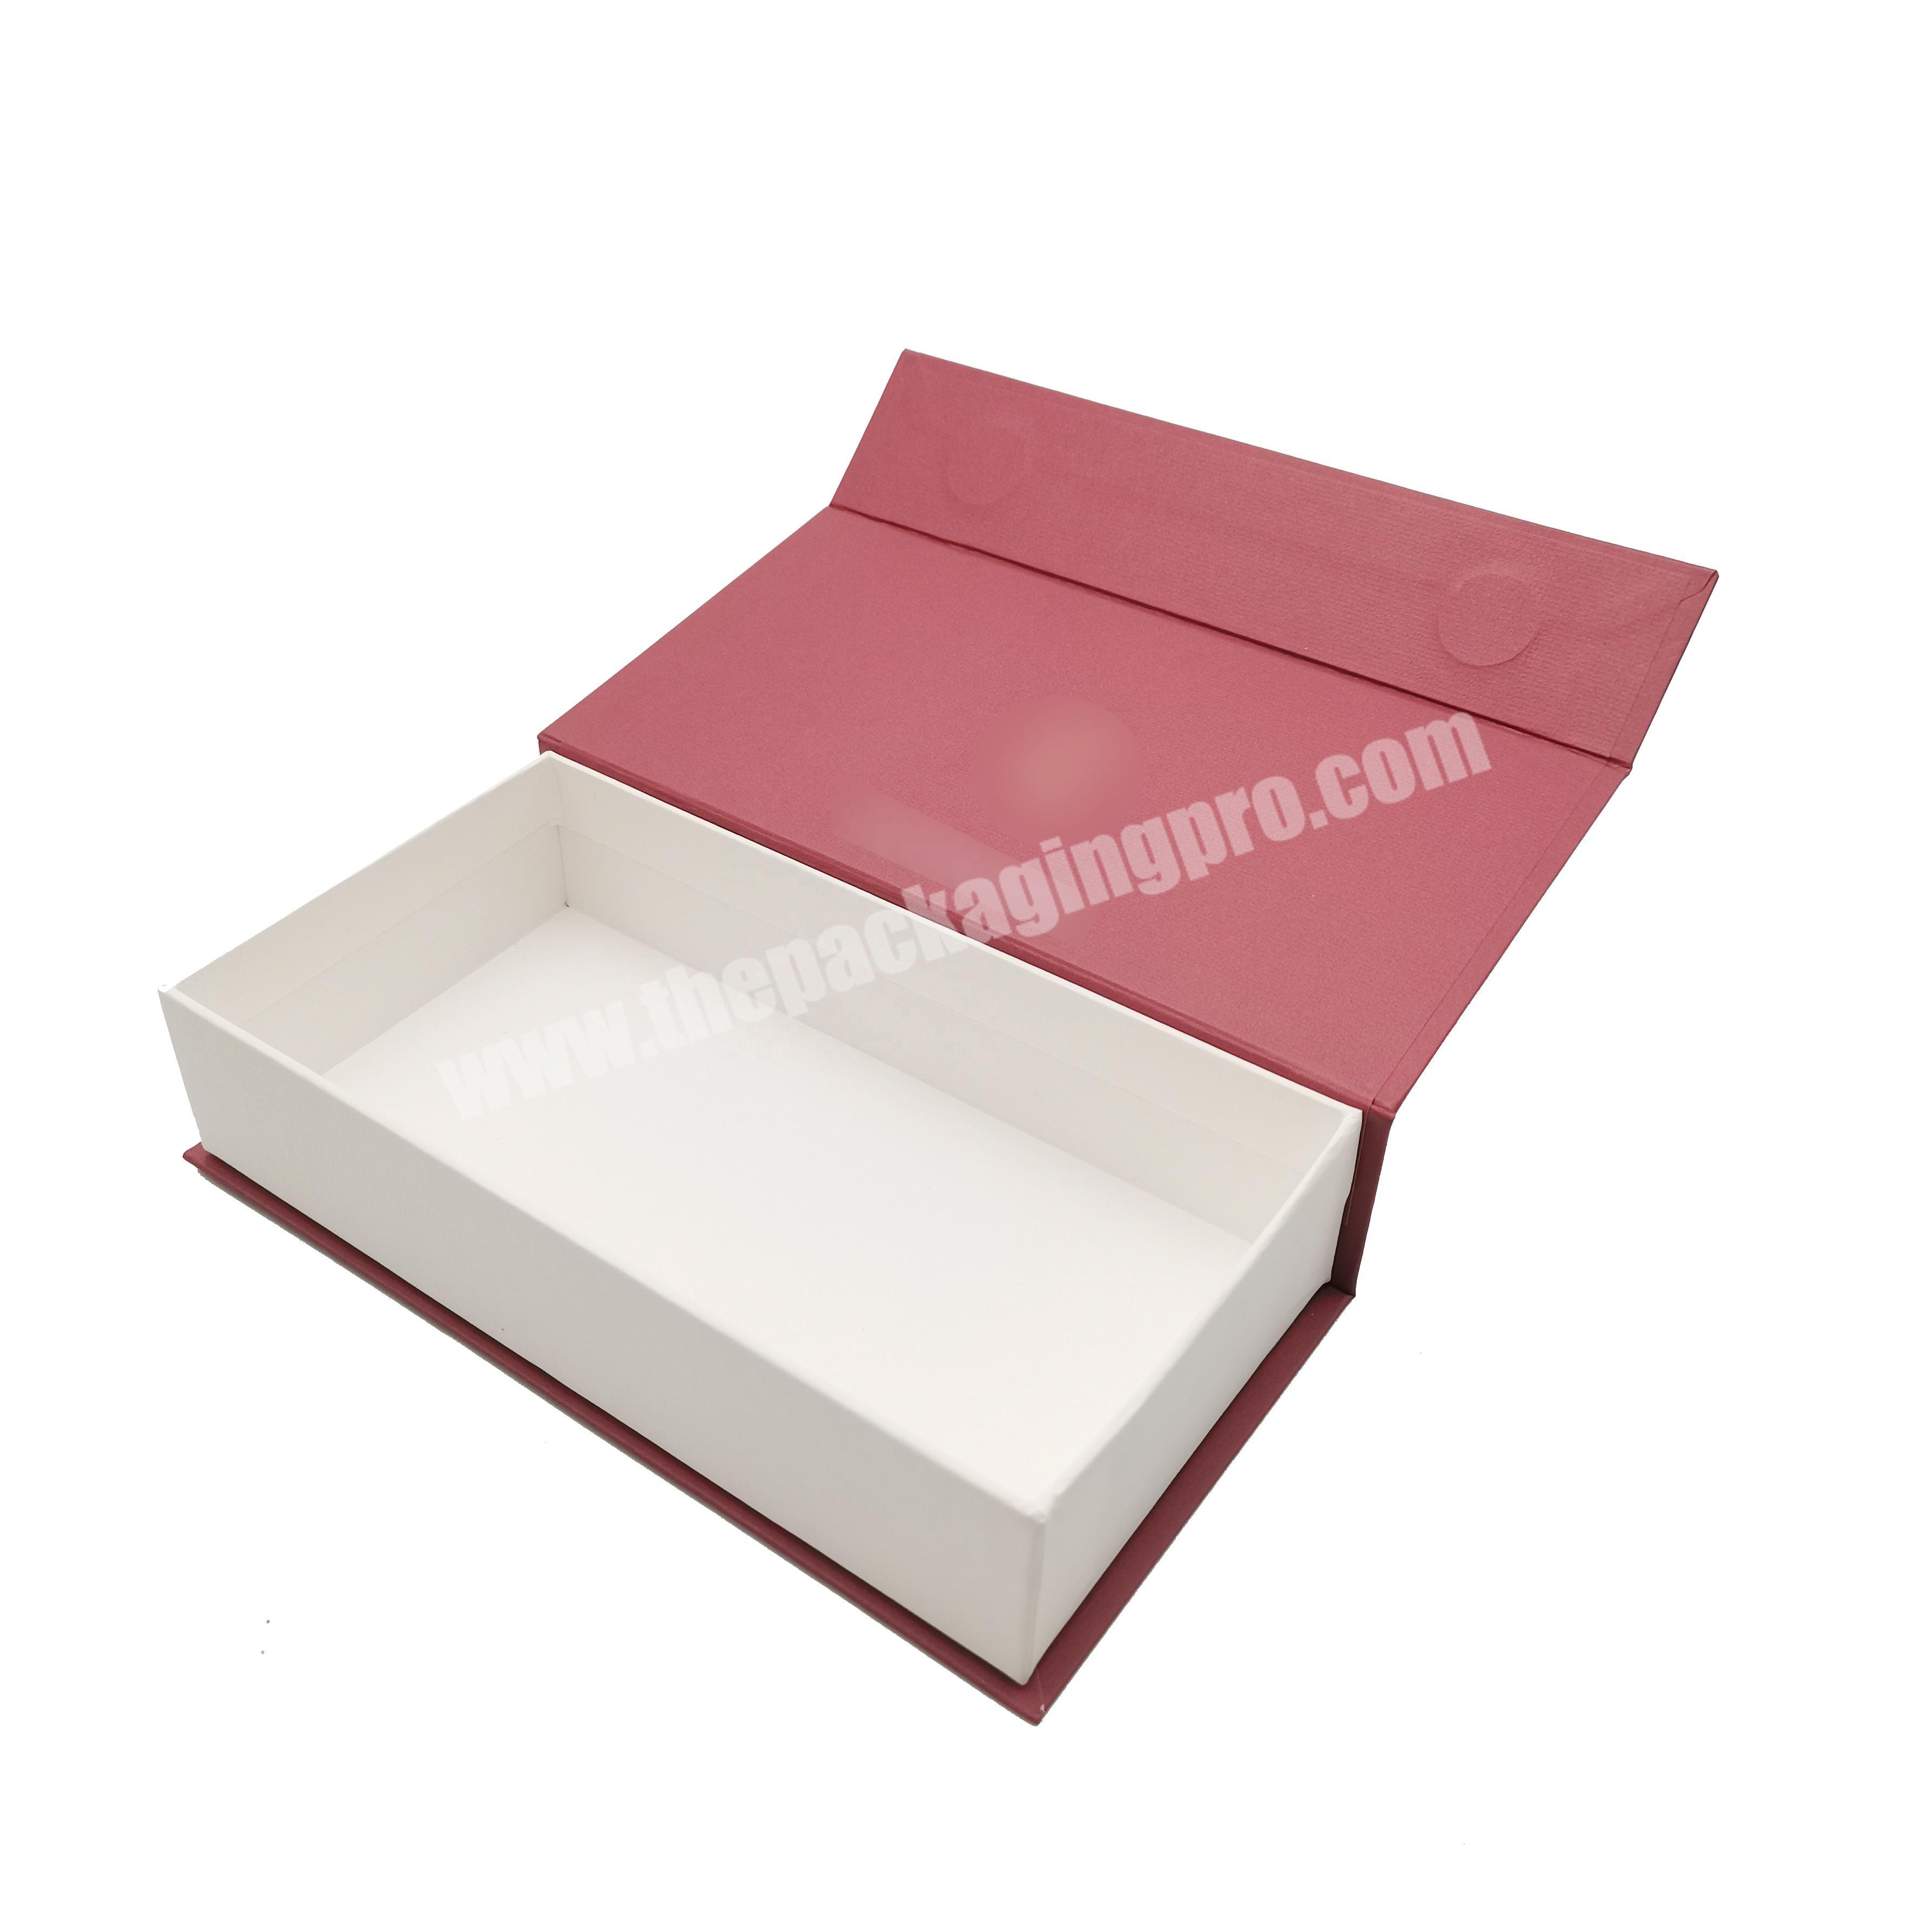 kexin custom logo red and cream uncoated woodfree special paper gift magnetic book box